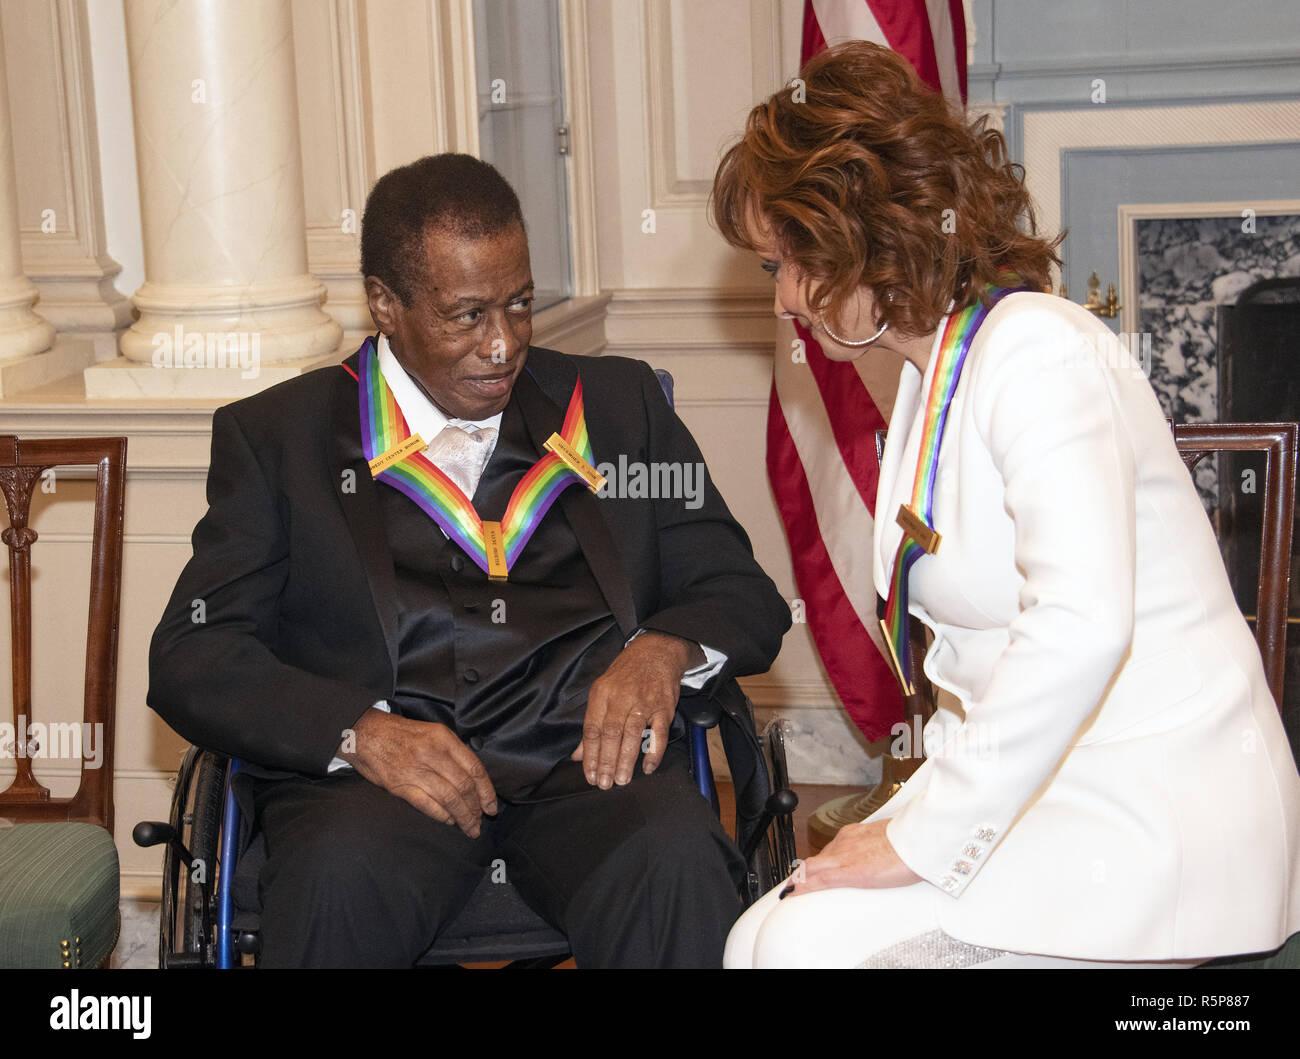 December 1, 2018 - Washington, District of Columbia, U.S. - Wayne Shorter, left and Reba McEntire, right, two of the recipients of the 41st Annual Kennedy Center Honors, converse prior to posing for a group photo following a dinner hosted by United States Deputy Secretary of State John J. Sullivan in their honor at the US Department of State in Washington, DC on Saturday, December 1, 2018. The 2018 honorees are: singer and actress Cher; composer and pianist Philip Glass; Country music entertainer Reba McEntire; and jazz saxophonist and composer Wayne Shorter. This year, the co-creators of H Stock Photo